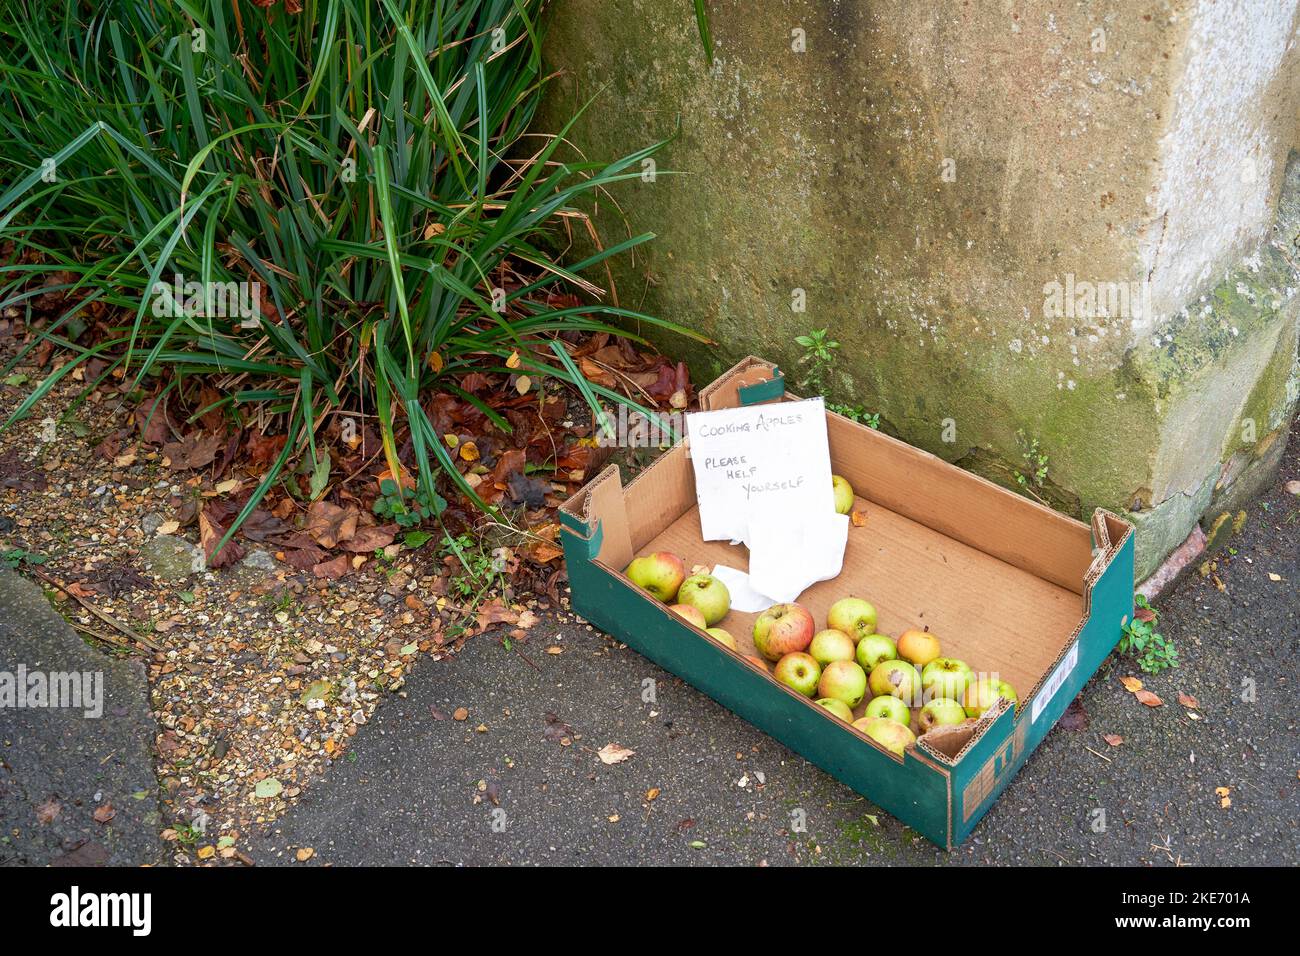 Free cooking apples in a cardboard box at the edge of a pavement with a hand written notice saying please help yourself Stock Photo